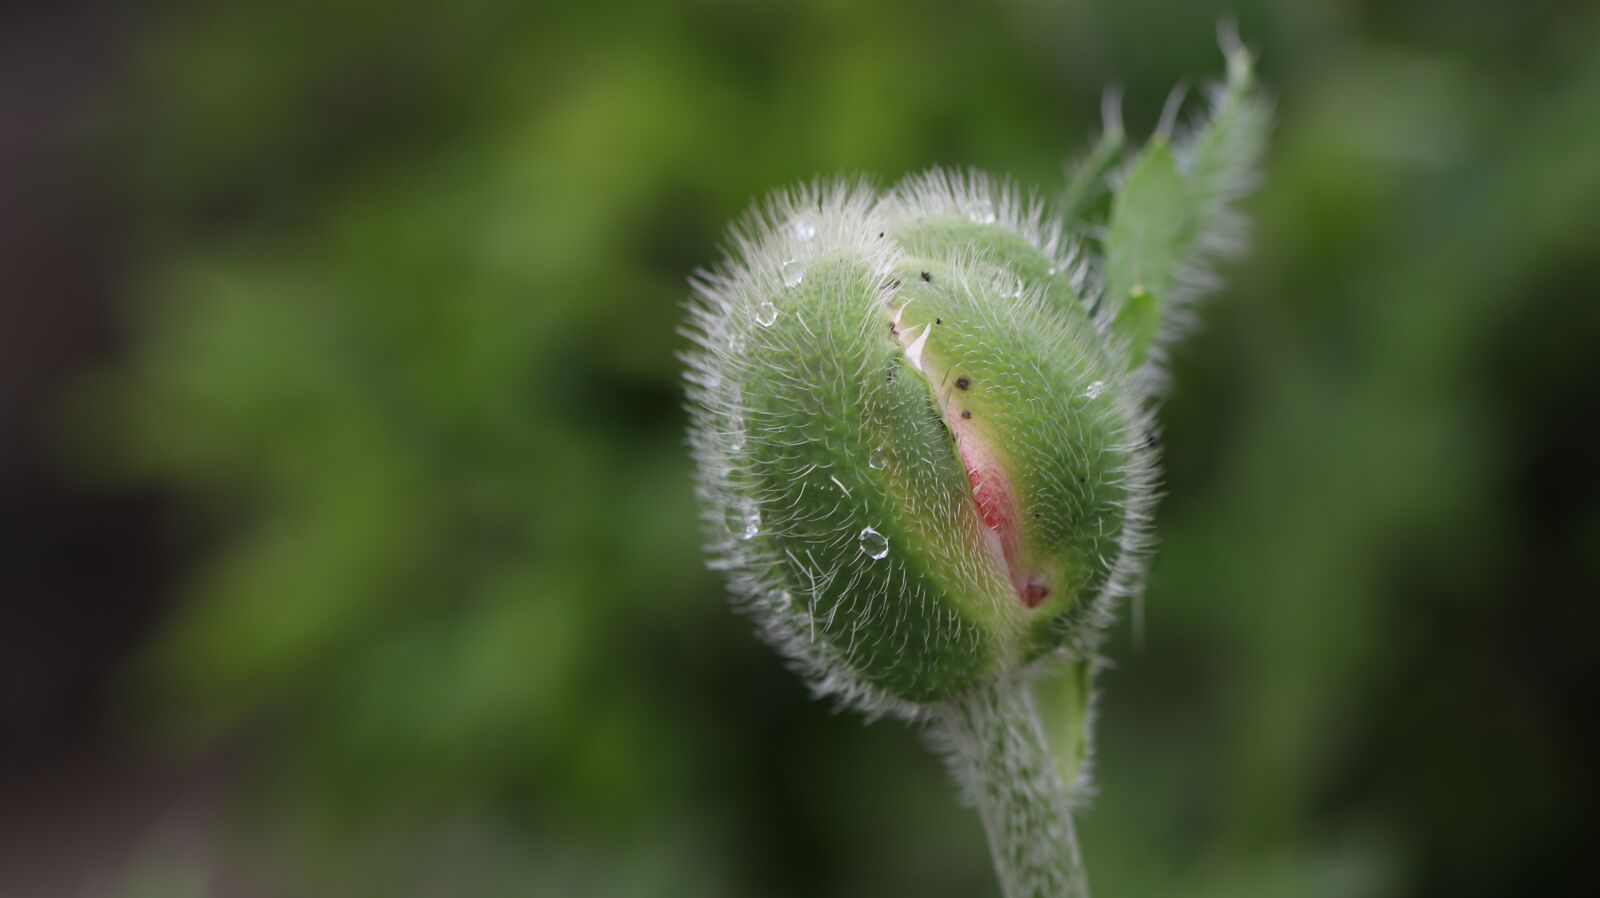 Canon EOS 80D + Canon TAMRON SP 90mm F/2.8 Di VC USD MACRO1:1 F004 sample photo. Flower bud, poppy, green photography